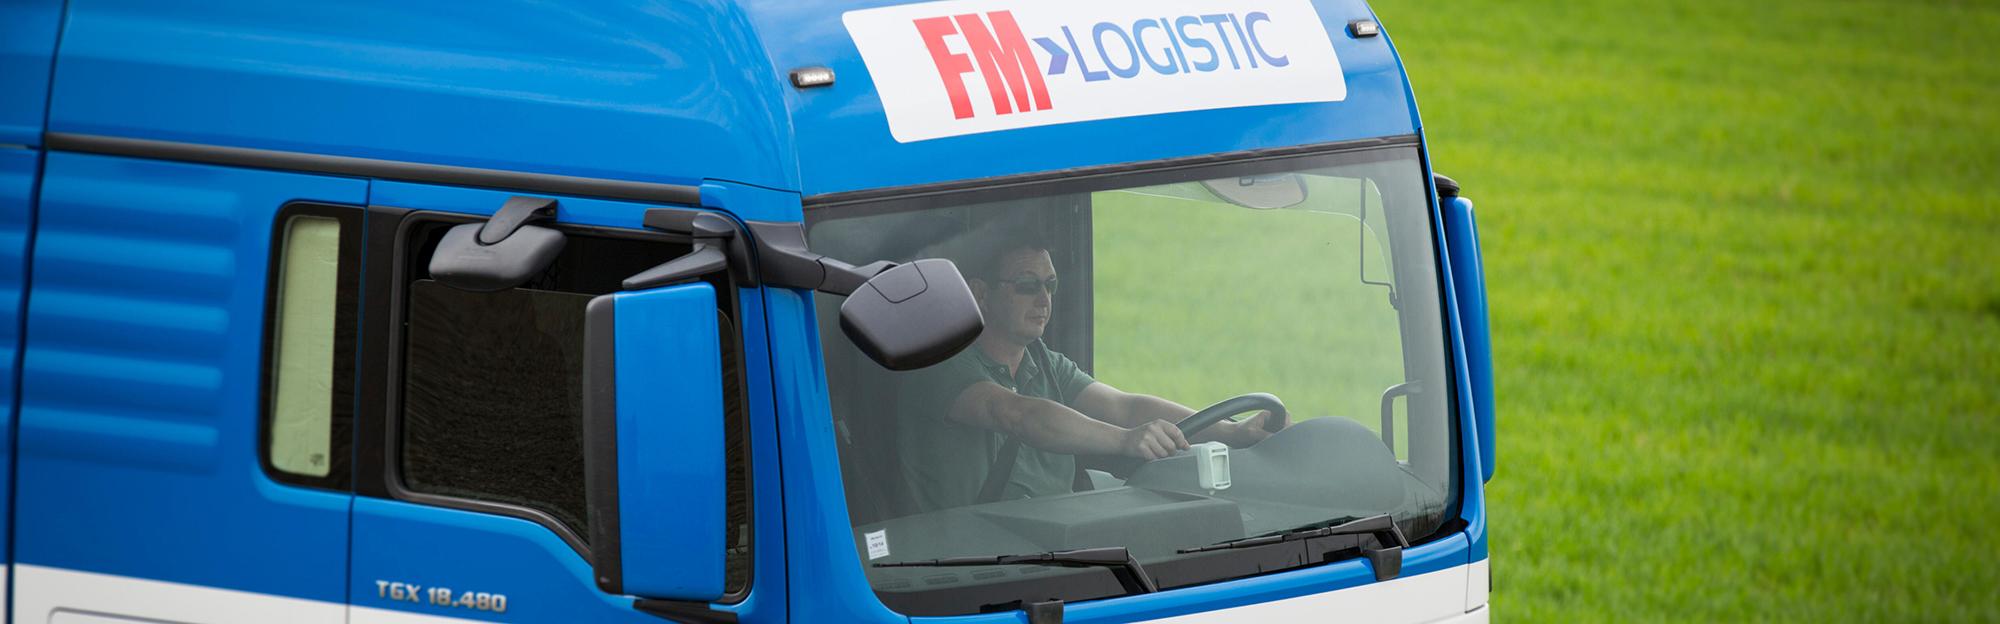 Product Land transport solutions - FM Logistic Italy image